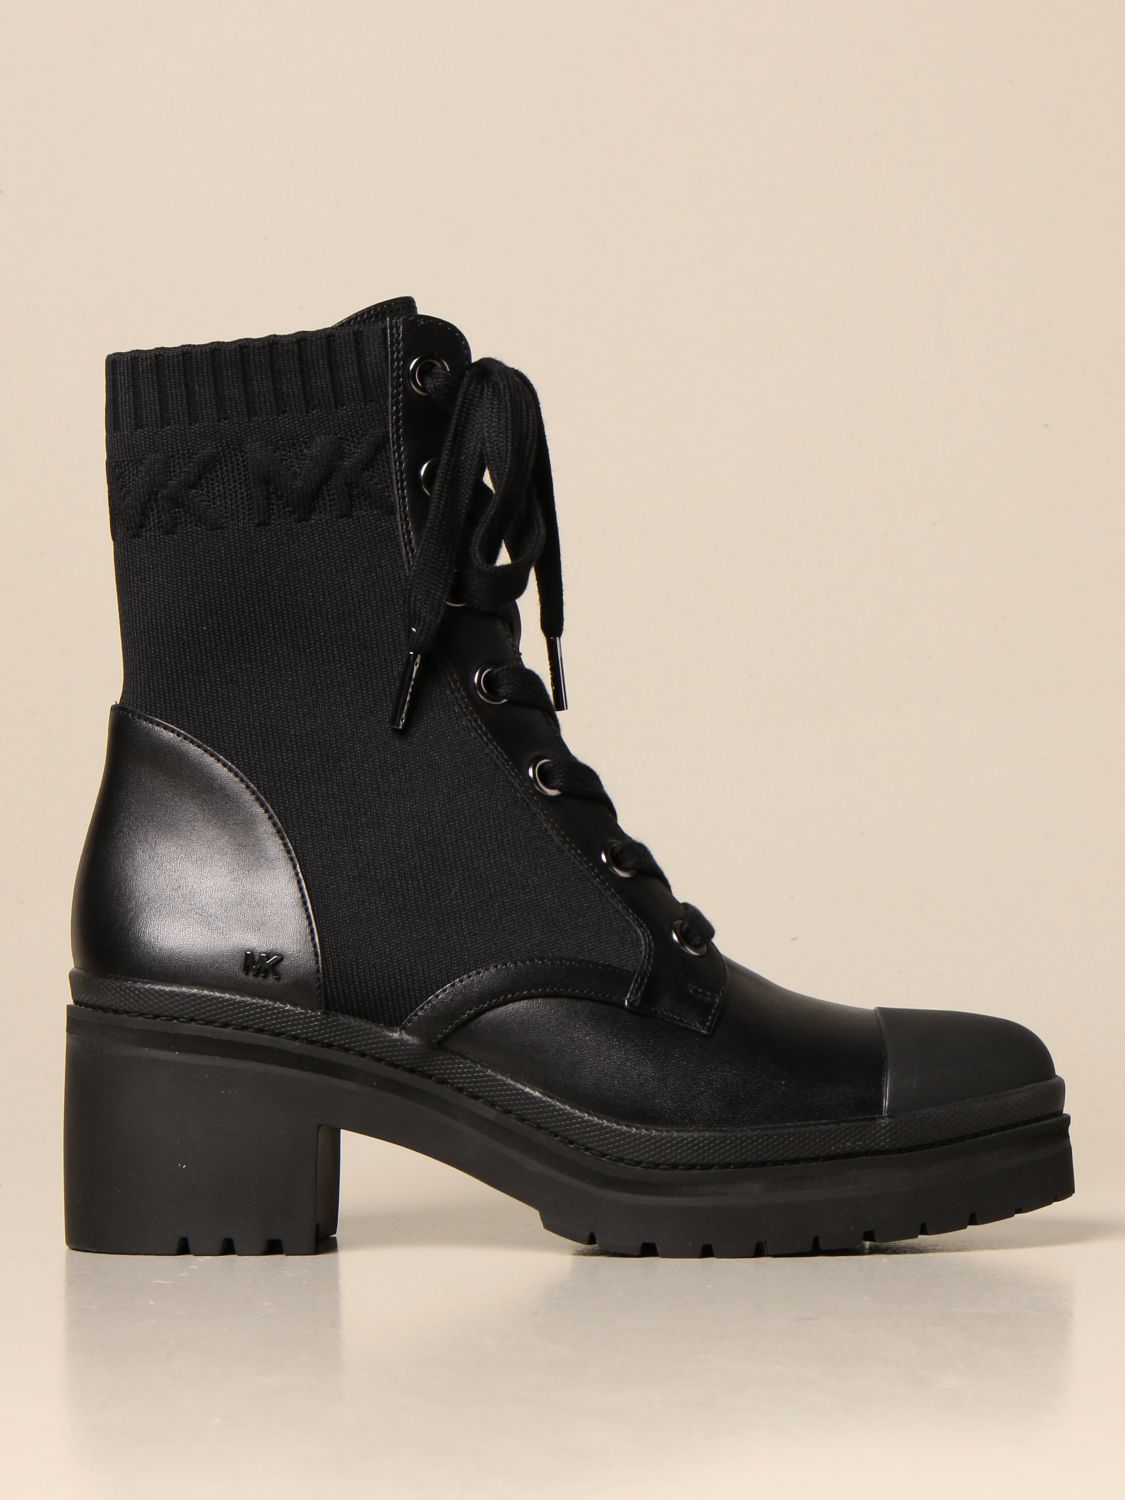 michael kors black leather ankle boots